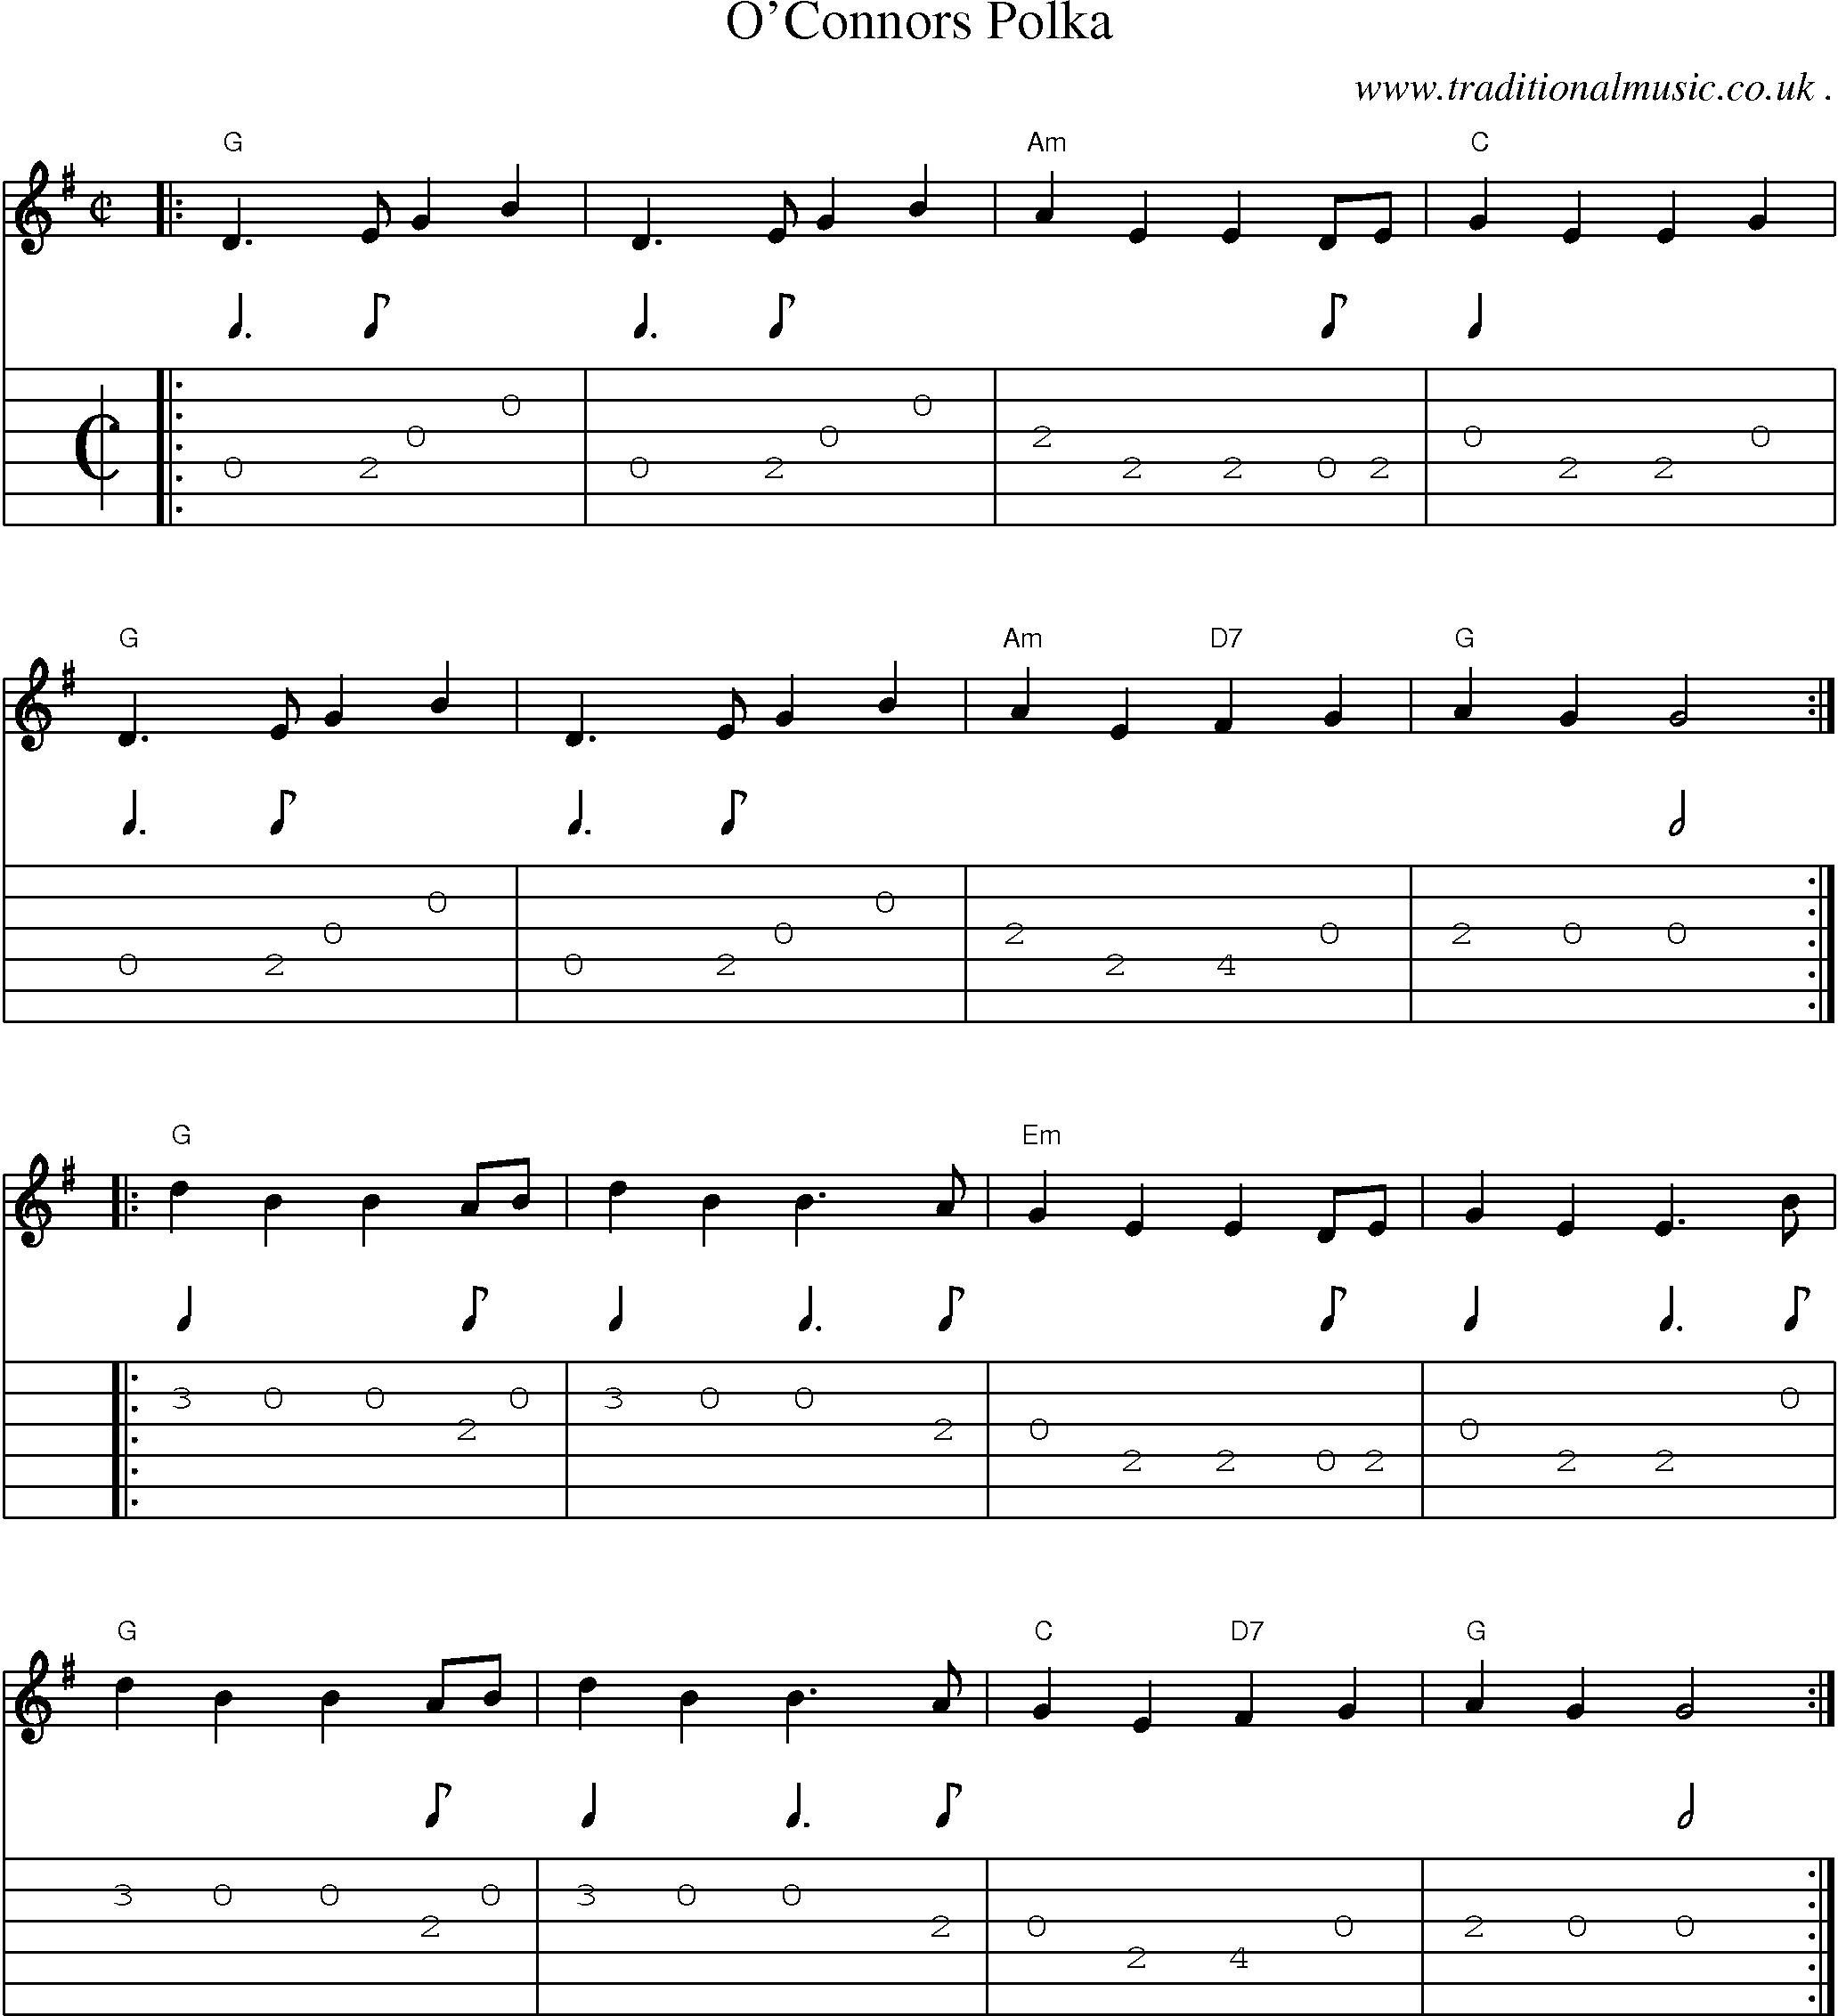 Music Score and Guitar Tabs for Oconnors Polka